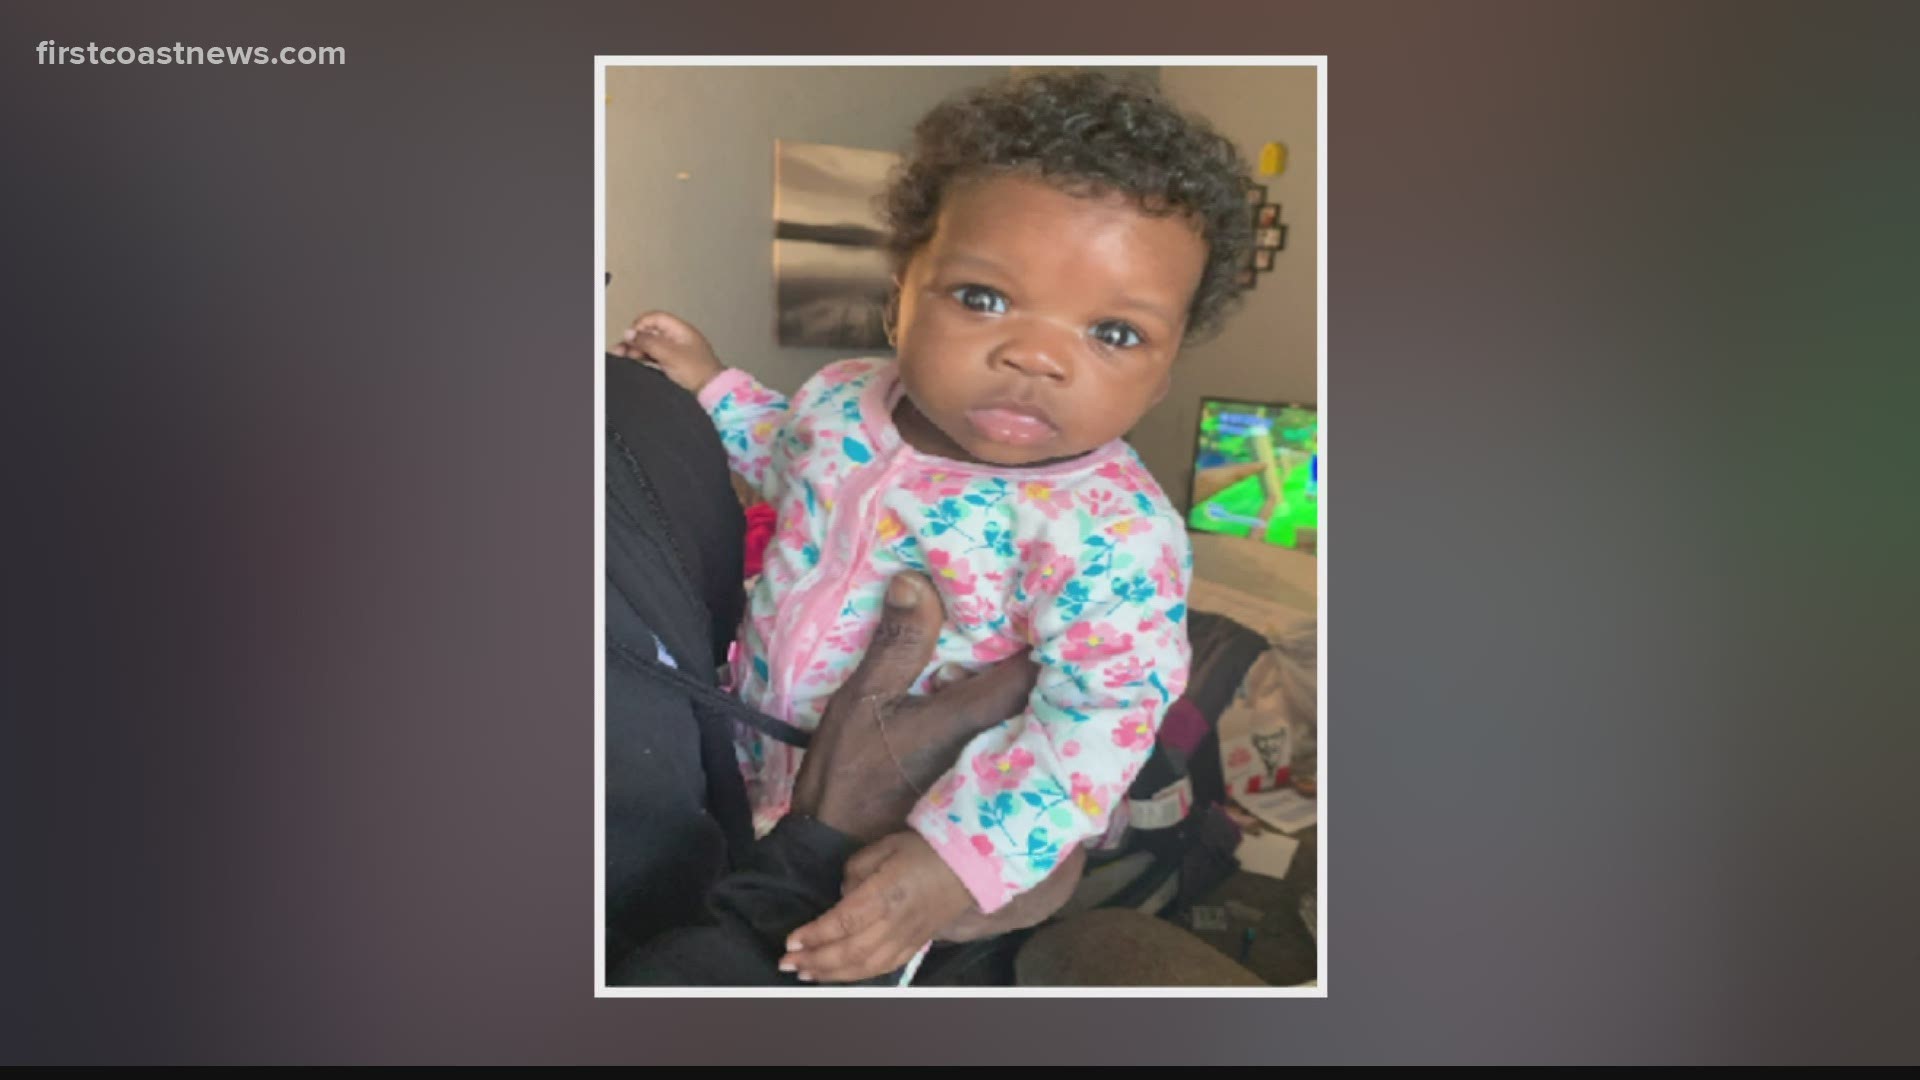 Missing 4-month-old baby, mother found safe | firstcoastnews.com